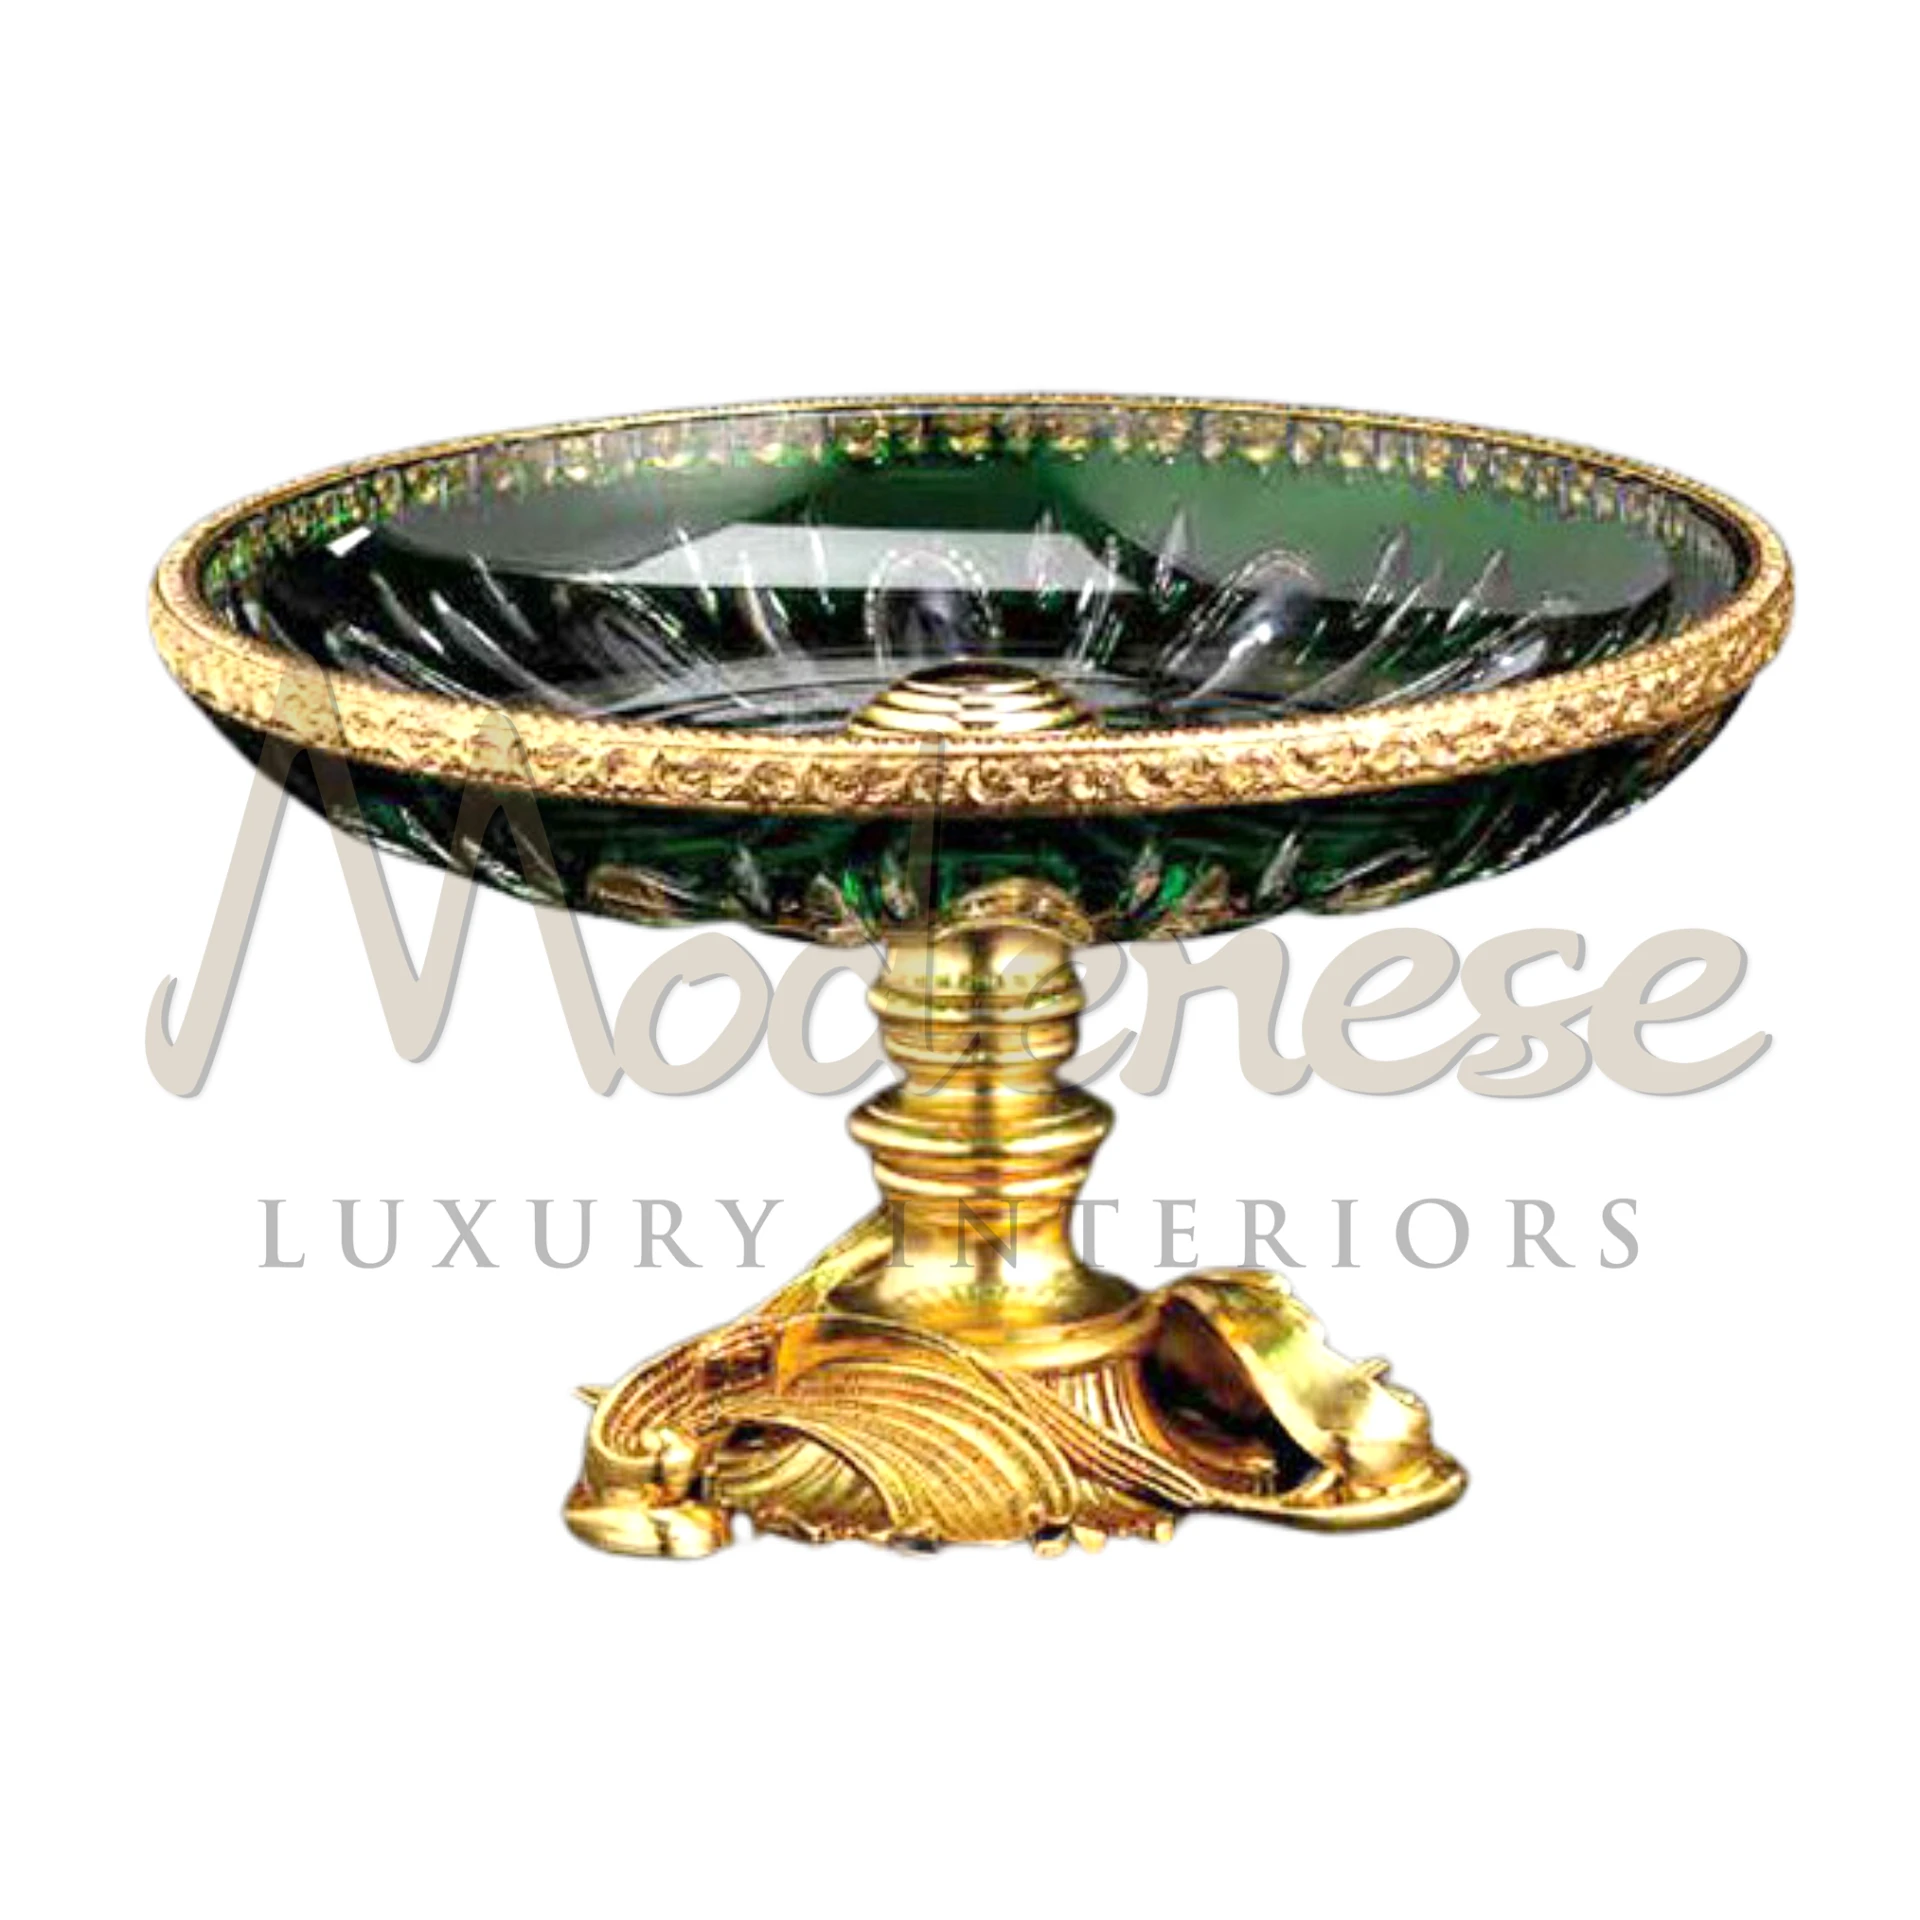 Traditional Green Glass Bowl in a classic design, crafted with high-quality glass, perfect for adding elegance and a timeless look to luxury interior settings.






